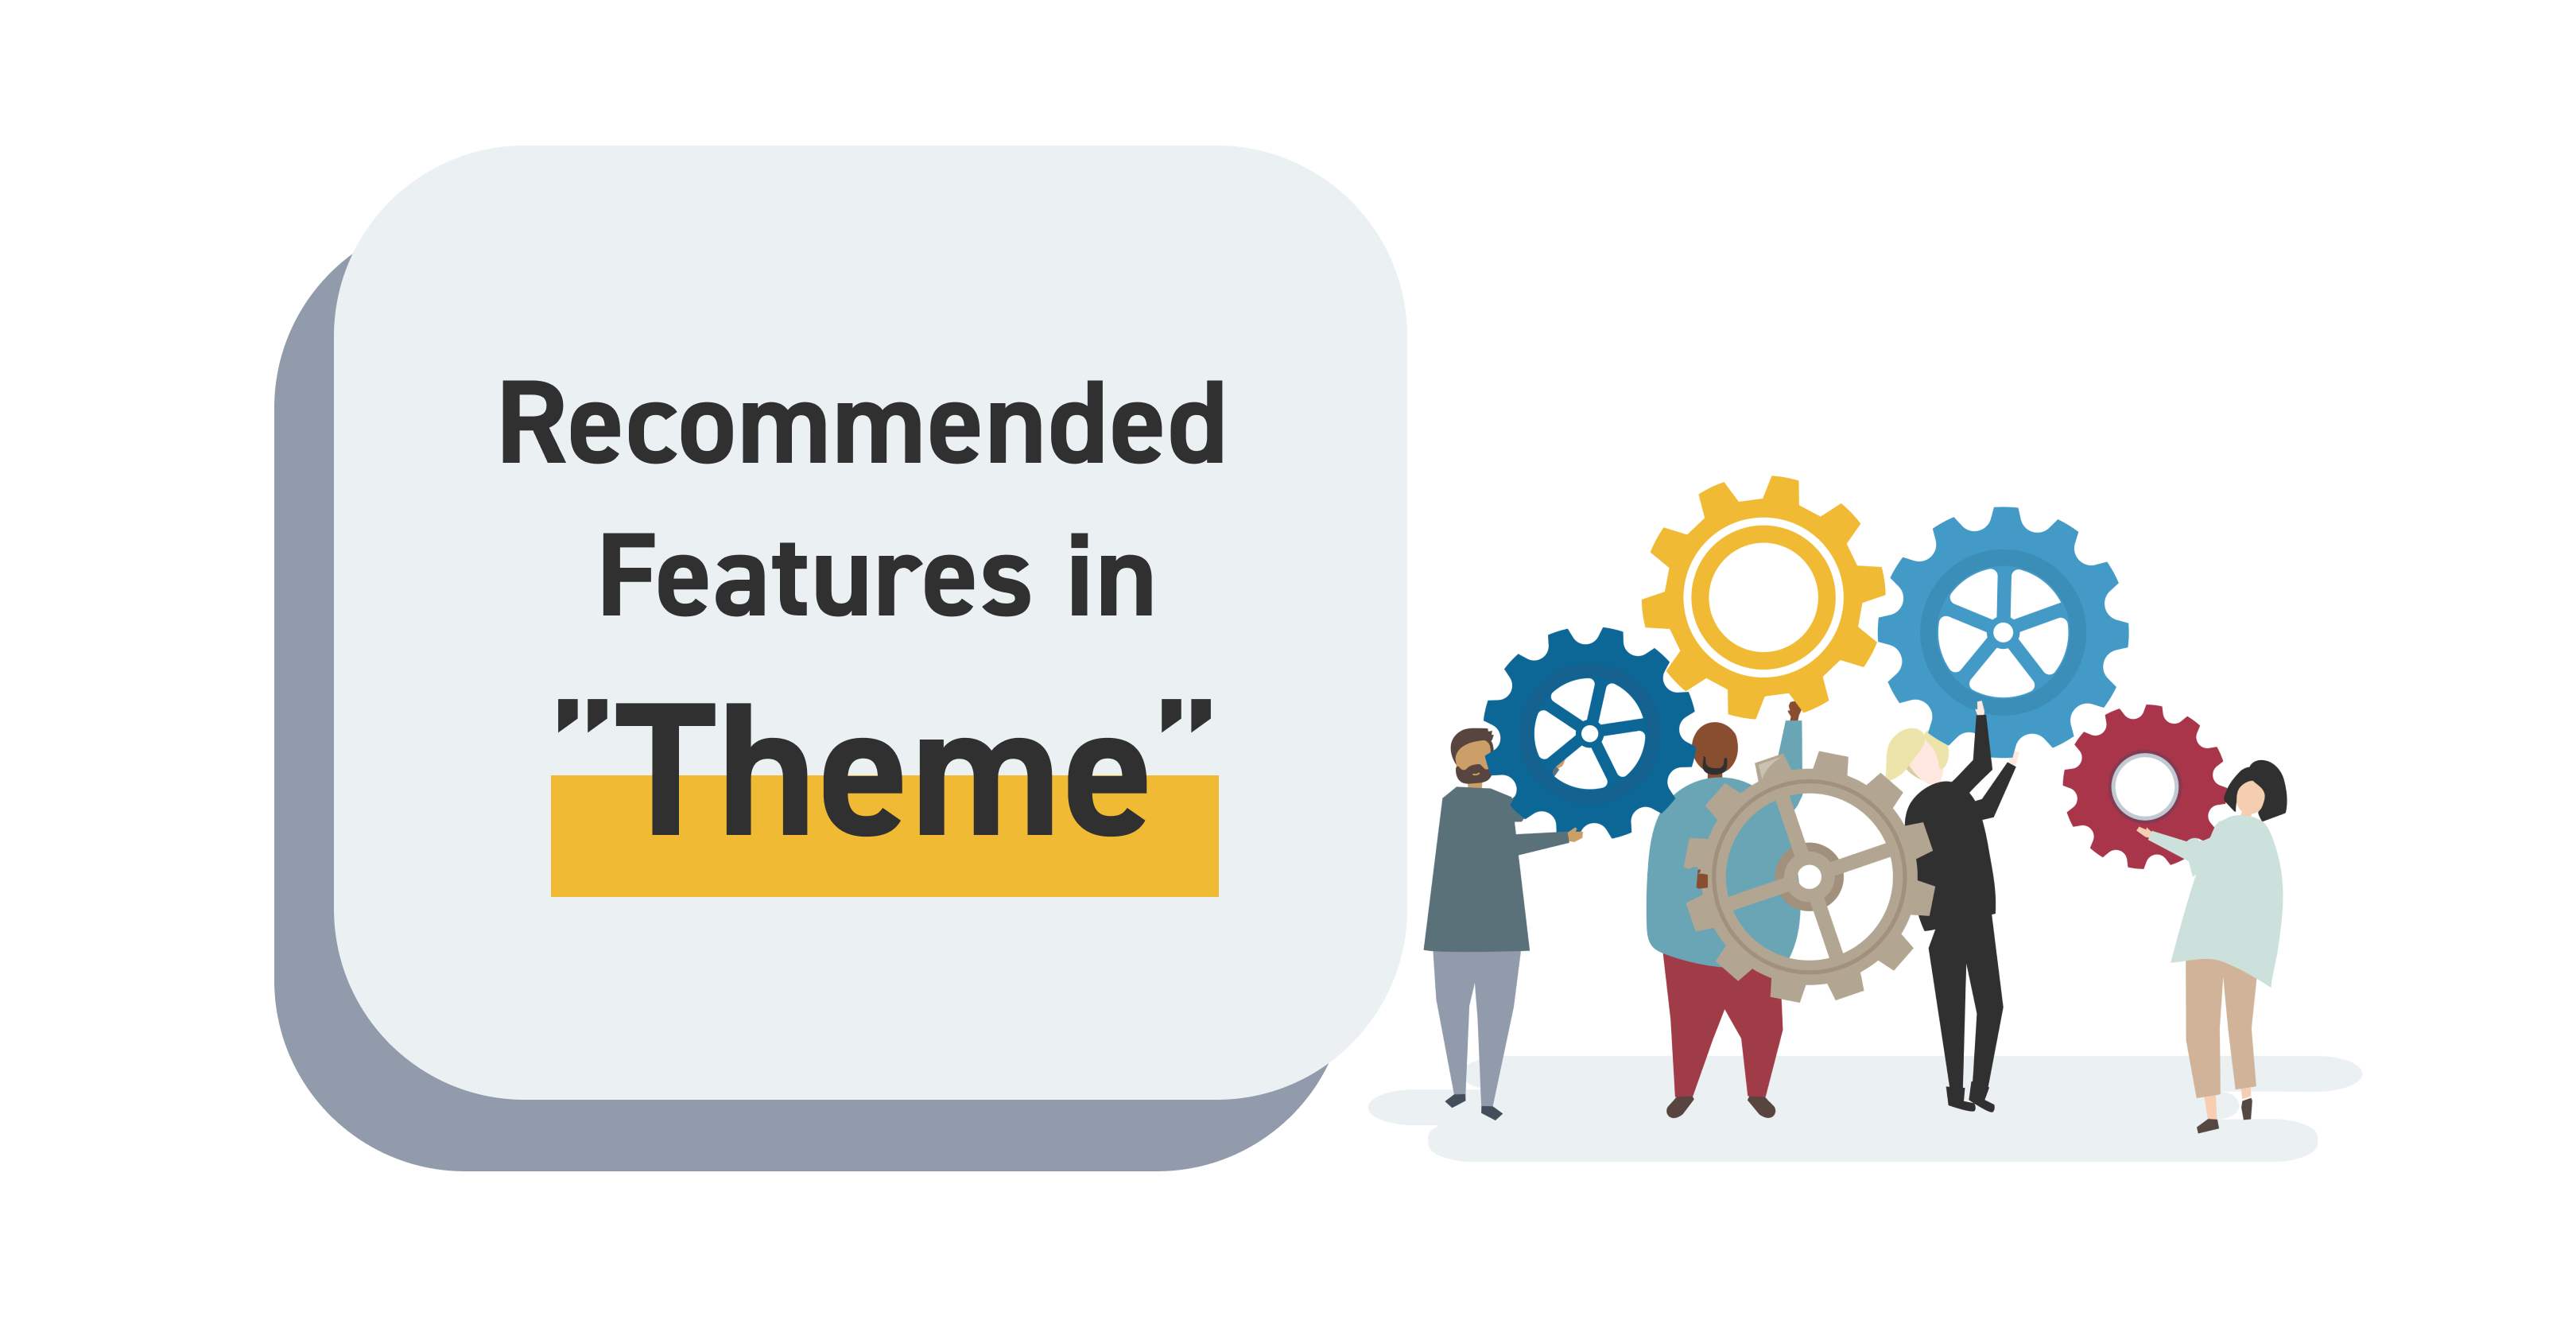 Introducing the recommended functions of the theme!